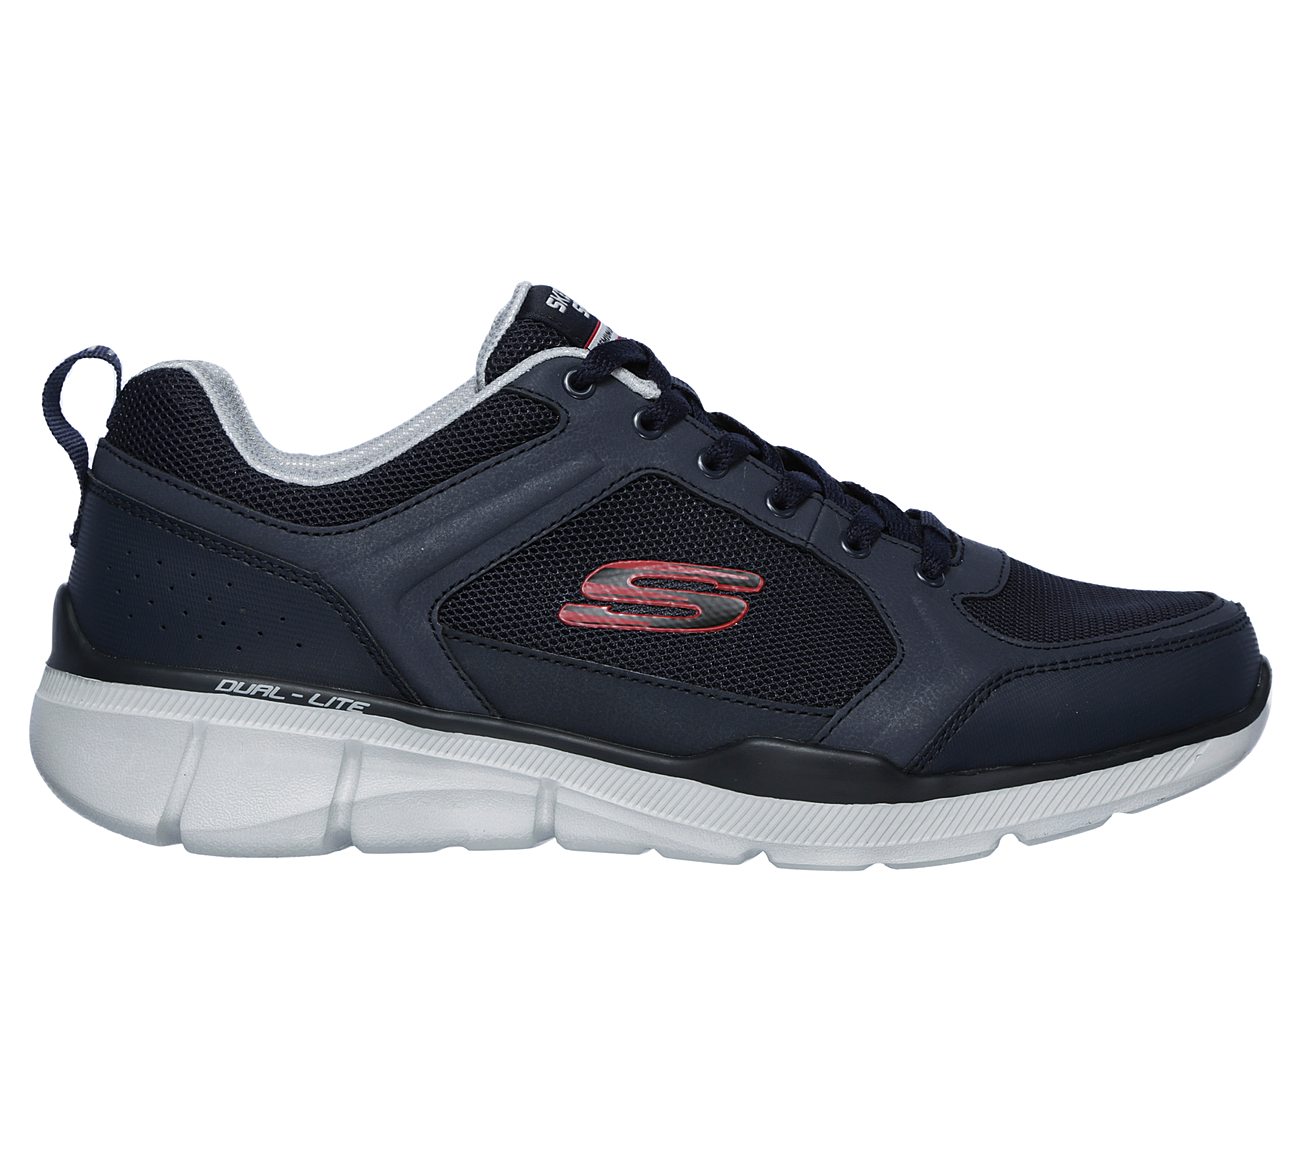 SKECHERS Men's Relaxed Fit: Equalizer 3 